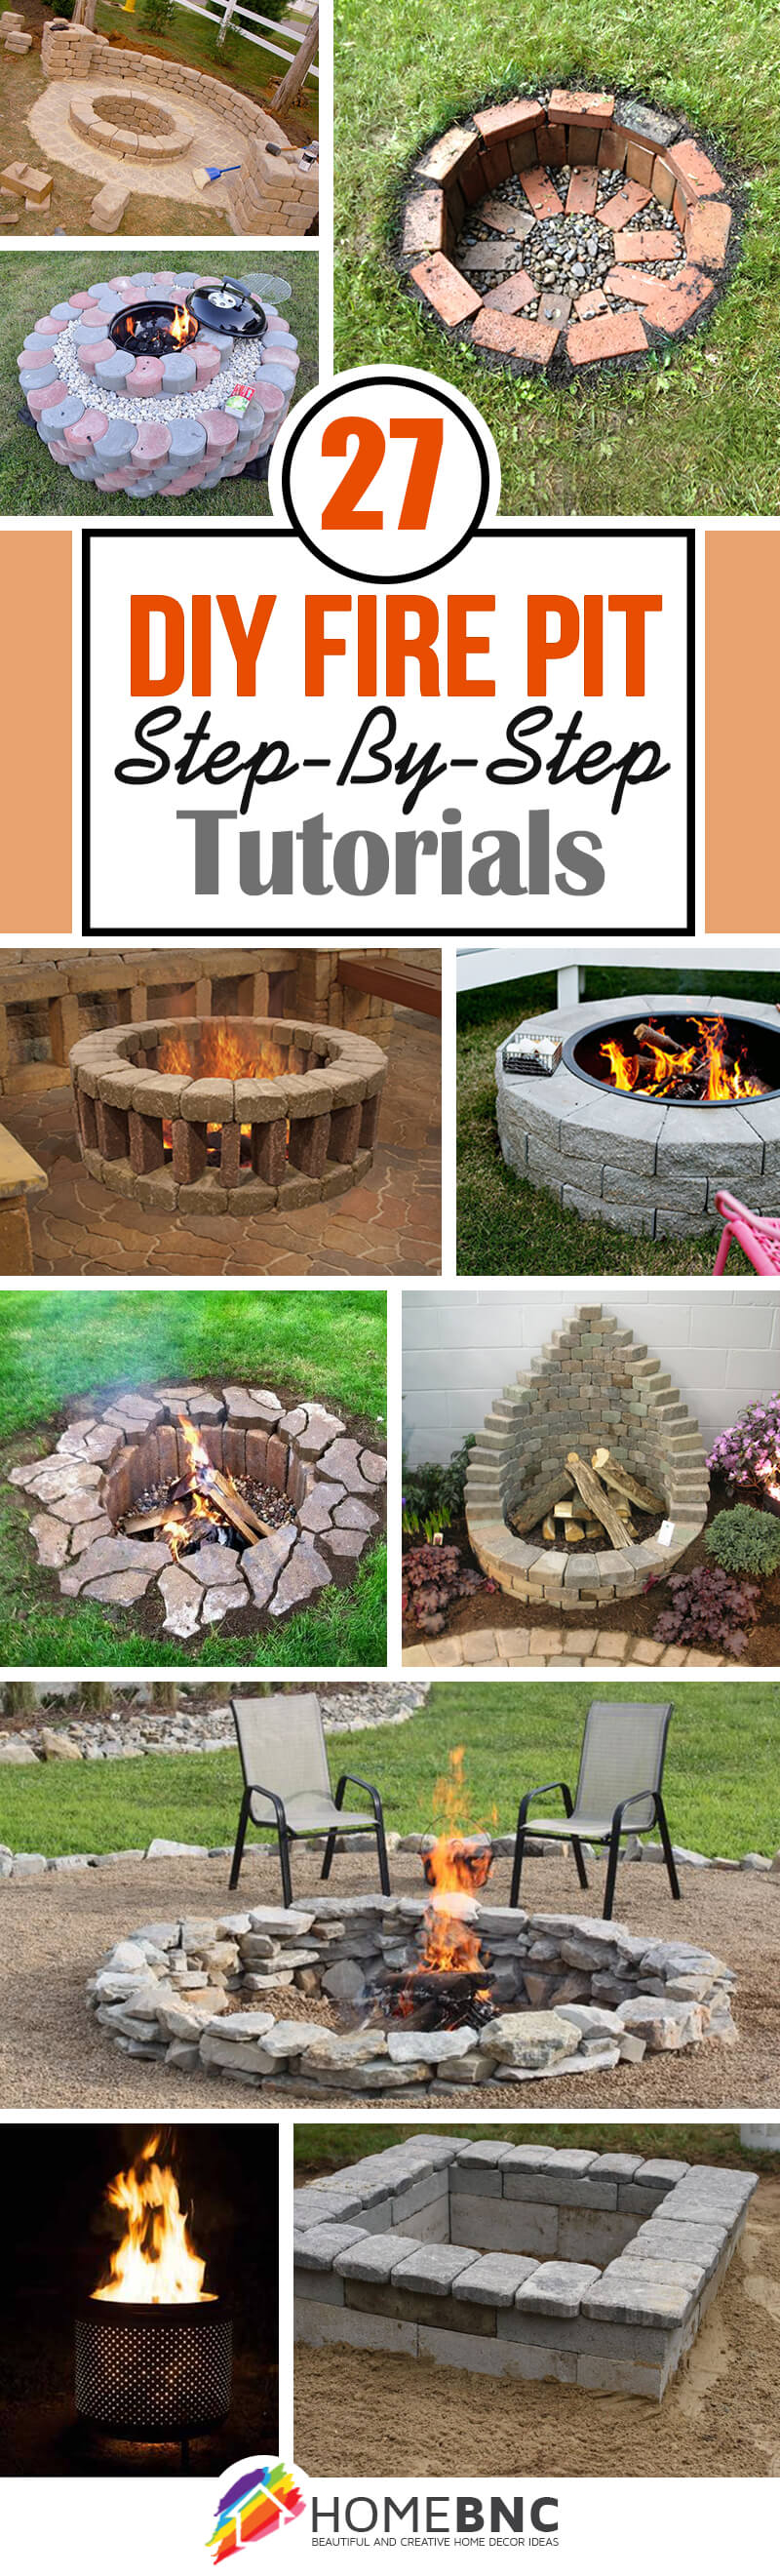 27 Best Diy Firepit Ideas And Designs For 2021 - How To Make A Patio Fire Pit